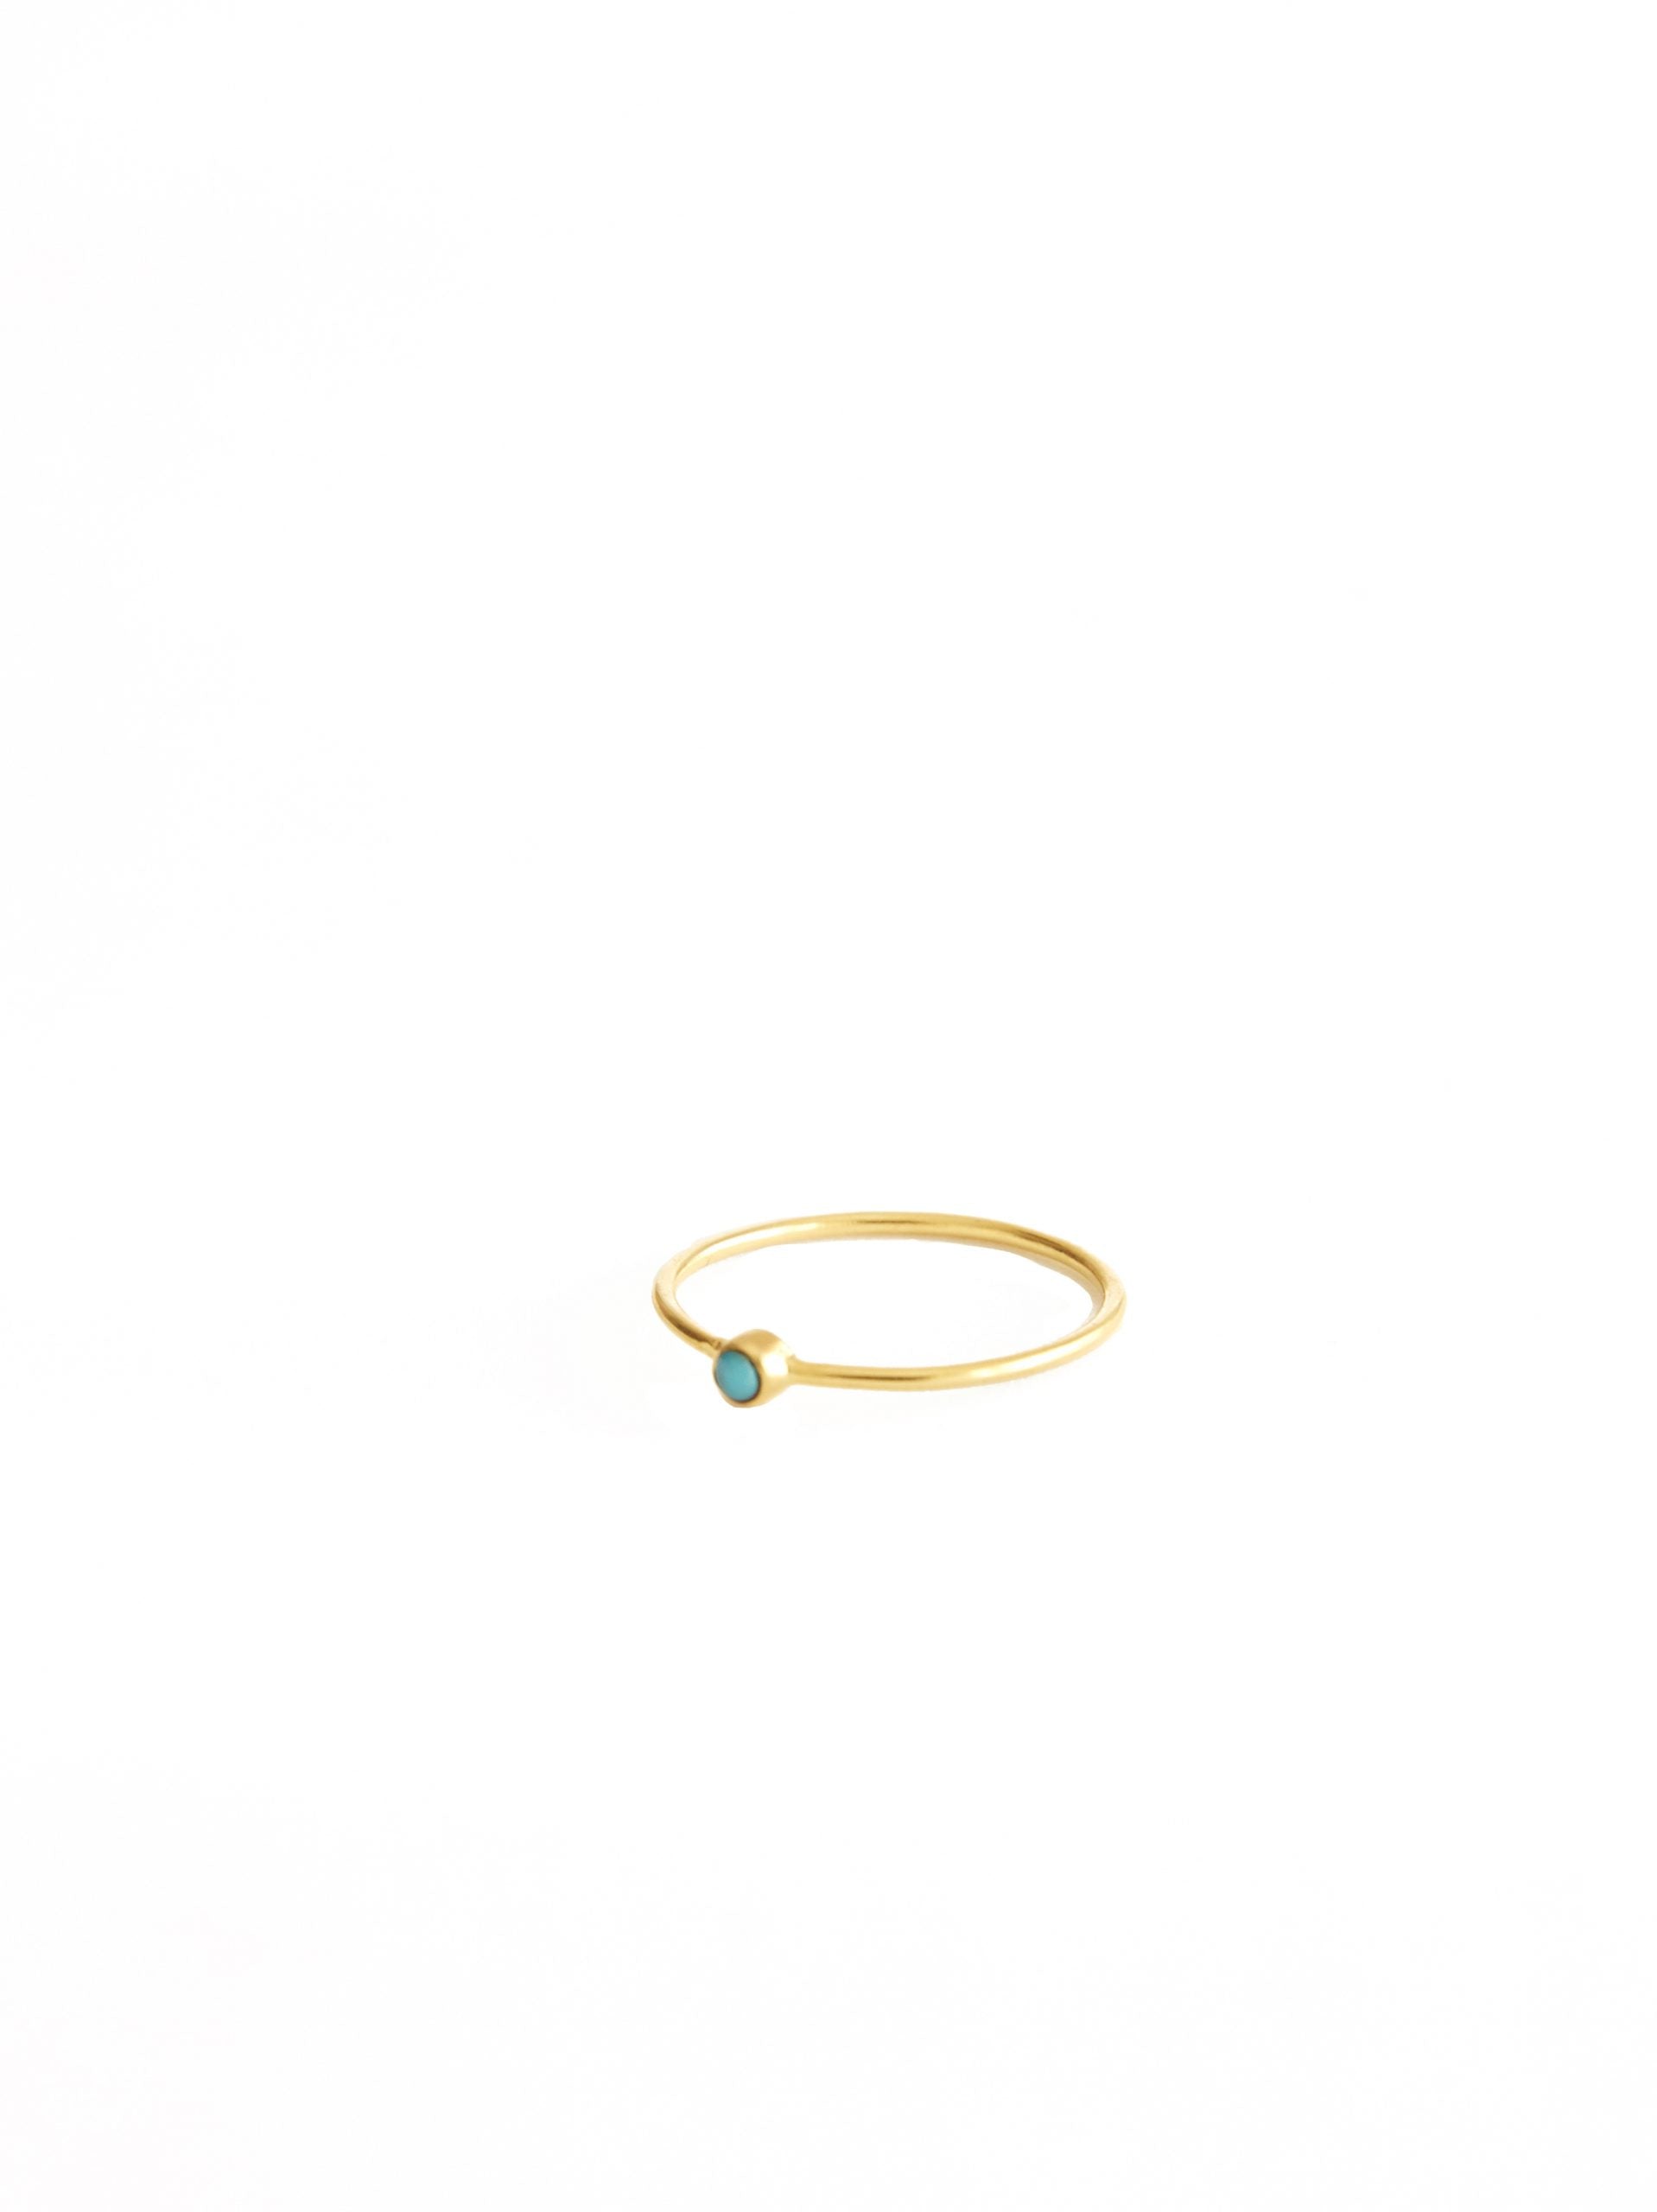 Petite Pierre Turquoise Ring Gold